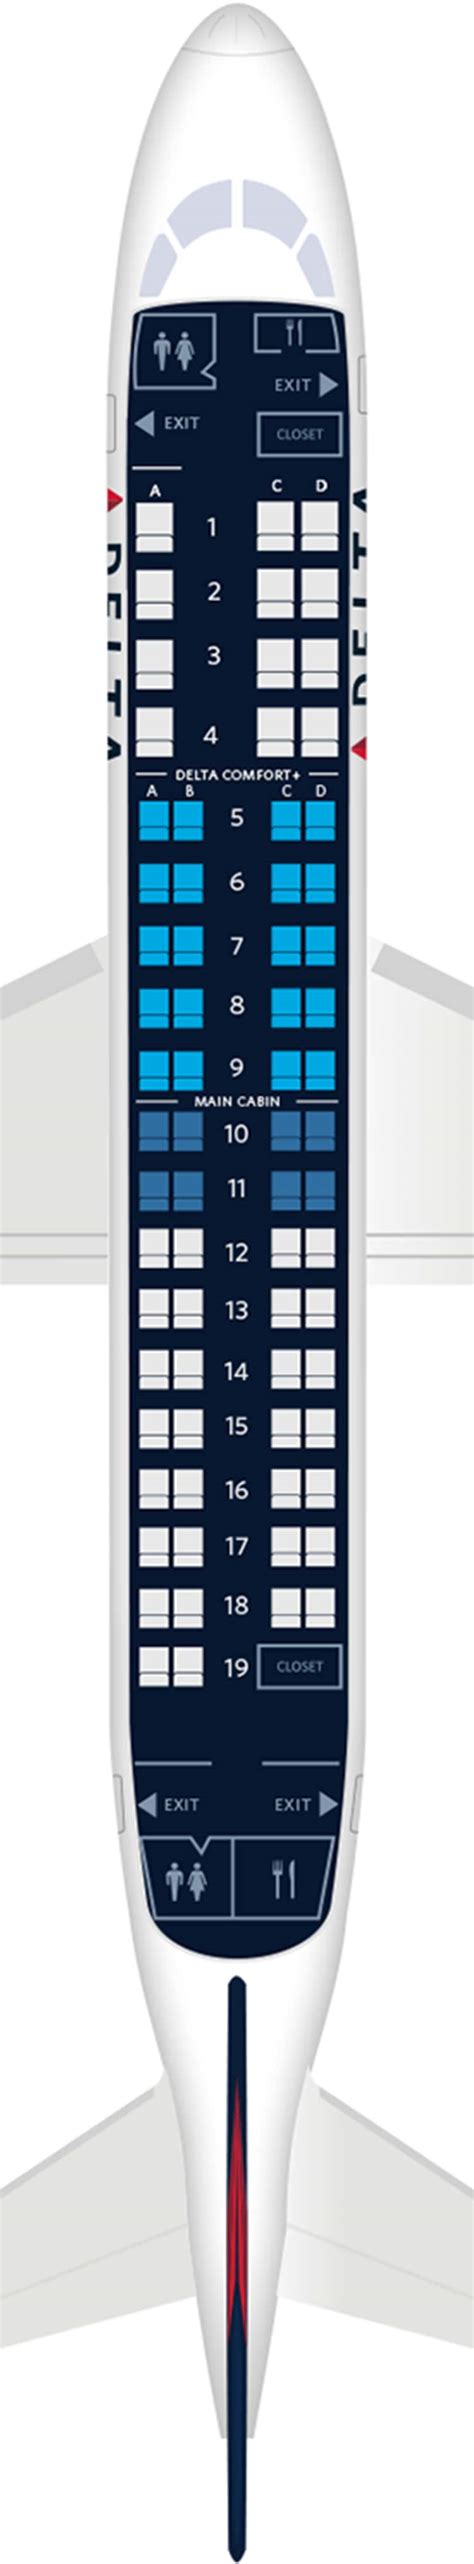 Embraer 175 seat map. Alaska Airlines Embraer 175 is replacing all CRJ-700s and Q400s in favor of larger and more comfortable regional jets. The E-175s will replace all CRJ-700s by the end of November 2016. ... I was assigned seat 1A in the first seat in the First Class cabin. Unlike some single class regional jets, the E175 features 2 classes. Alaska Airlines ... 